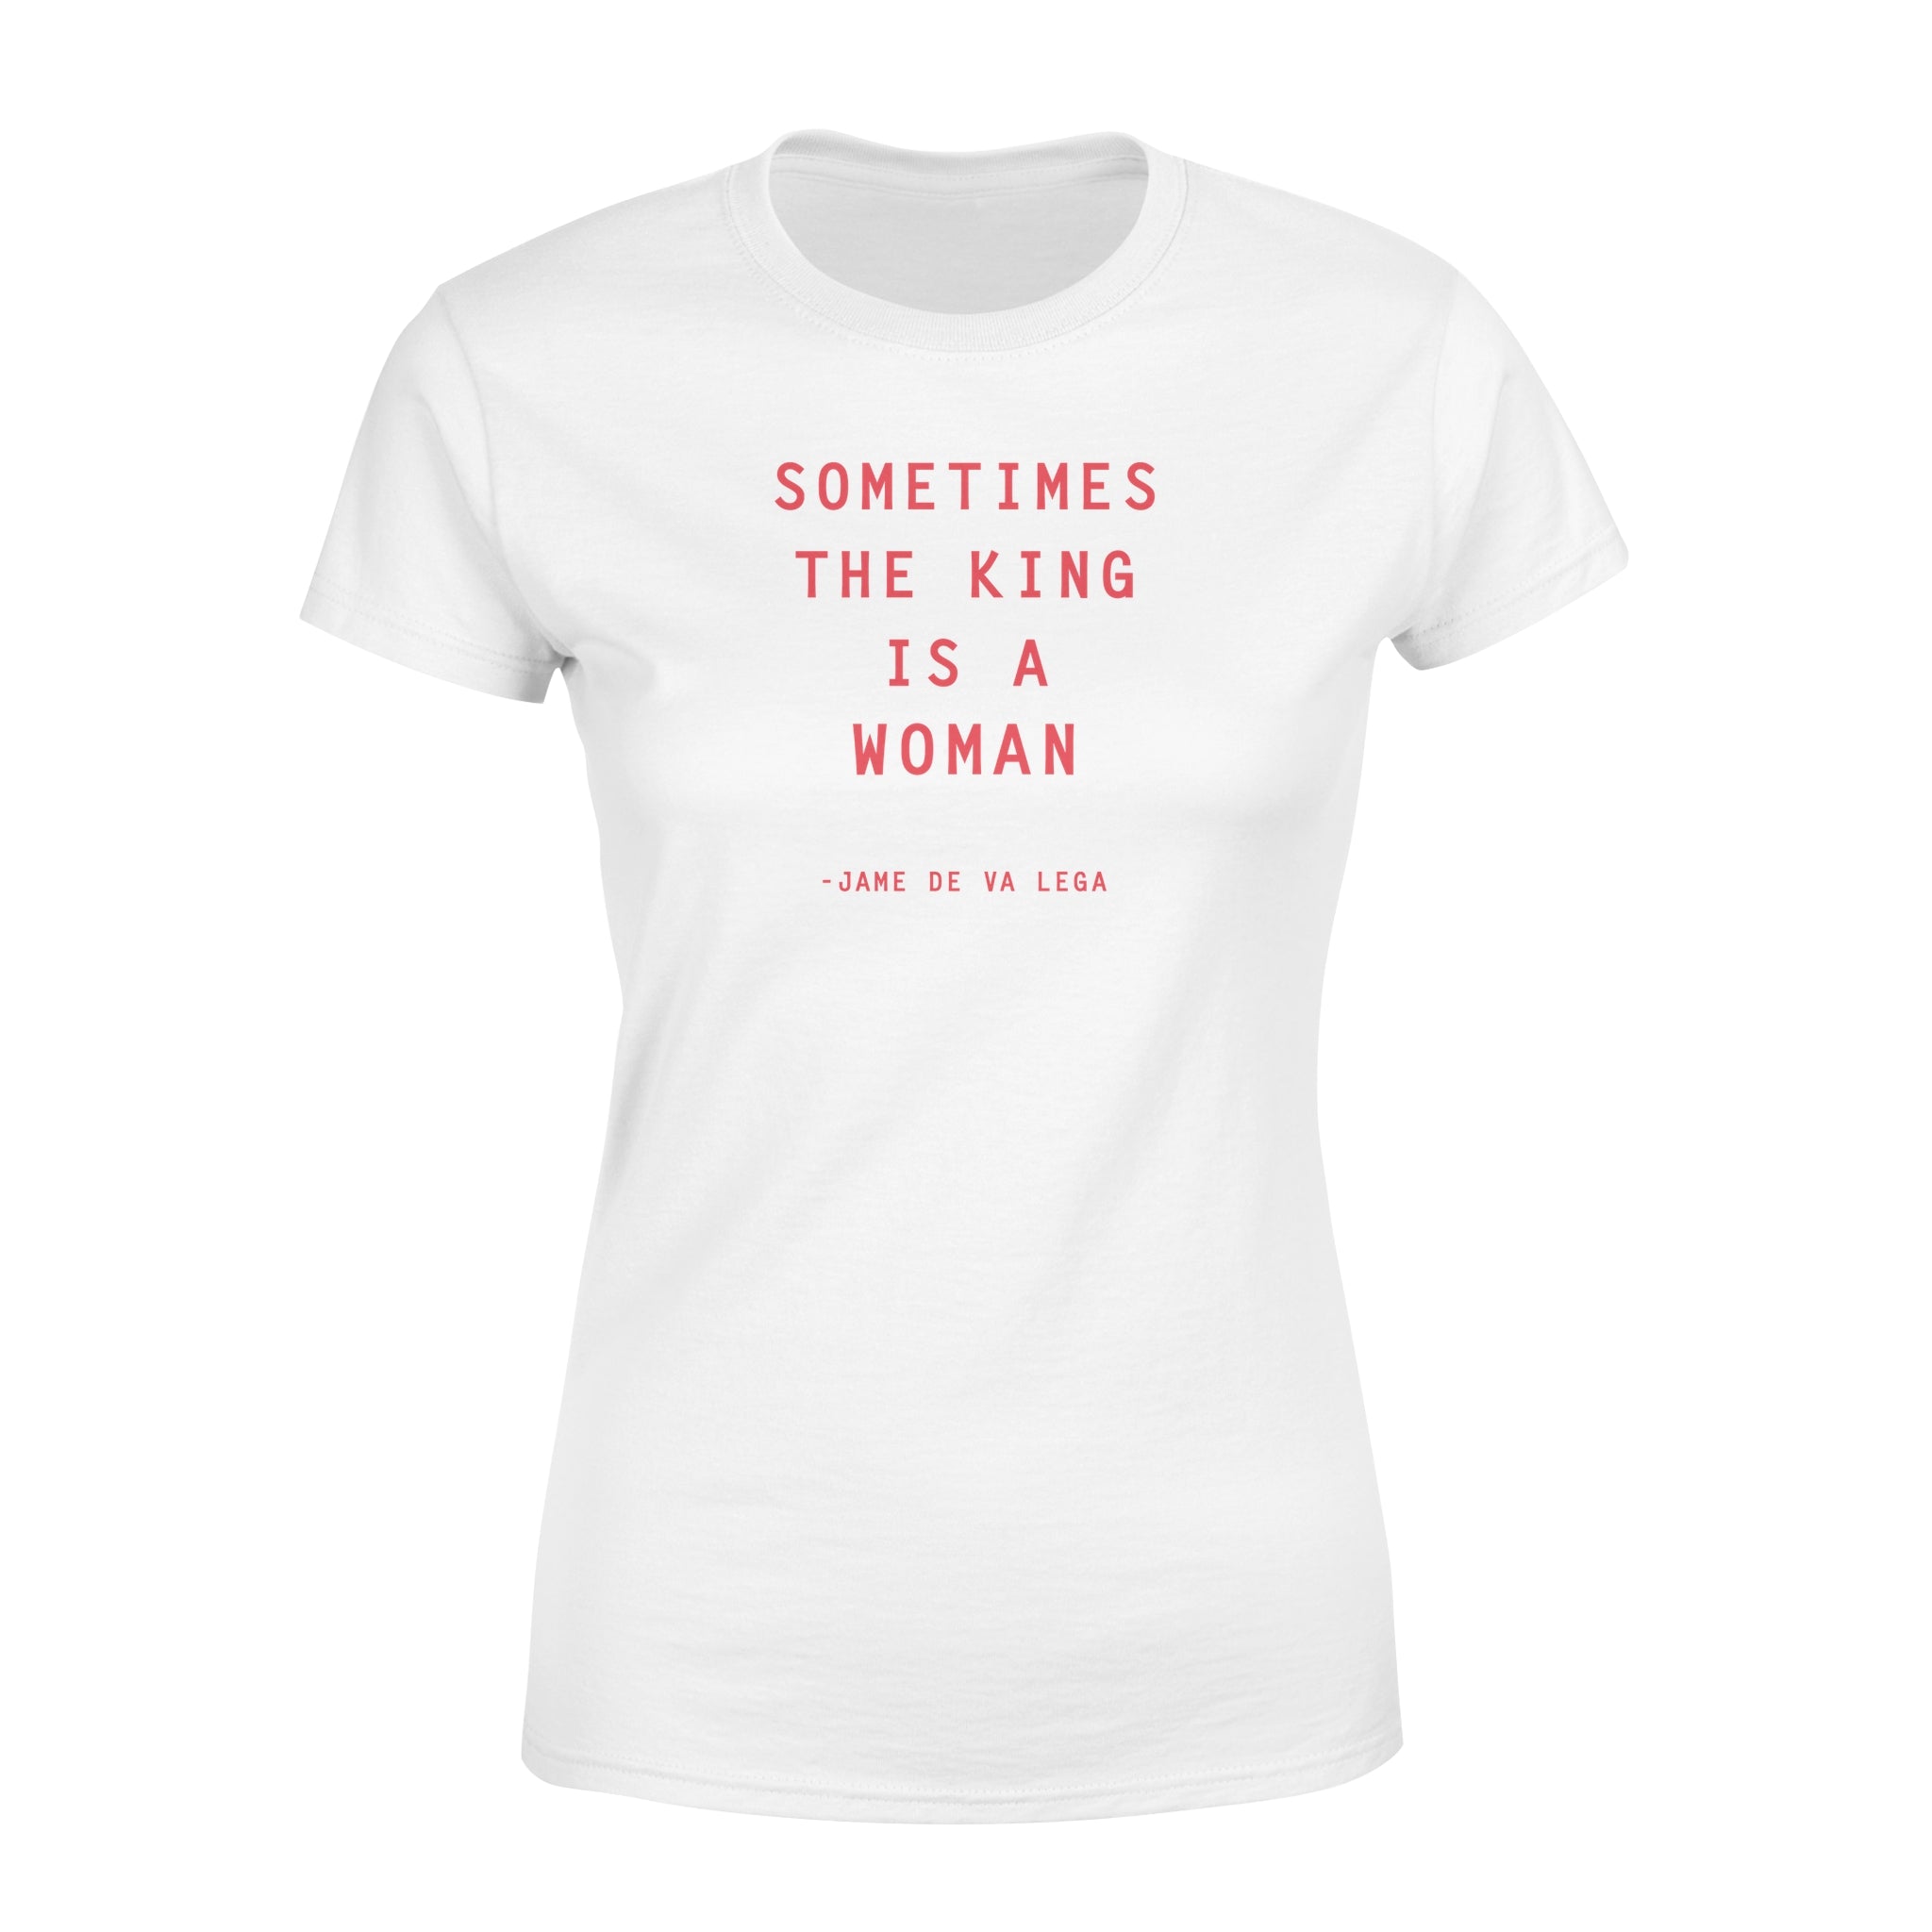 Sometimes The King Is A Woman - Women's T-shirt